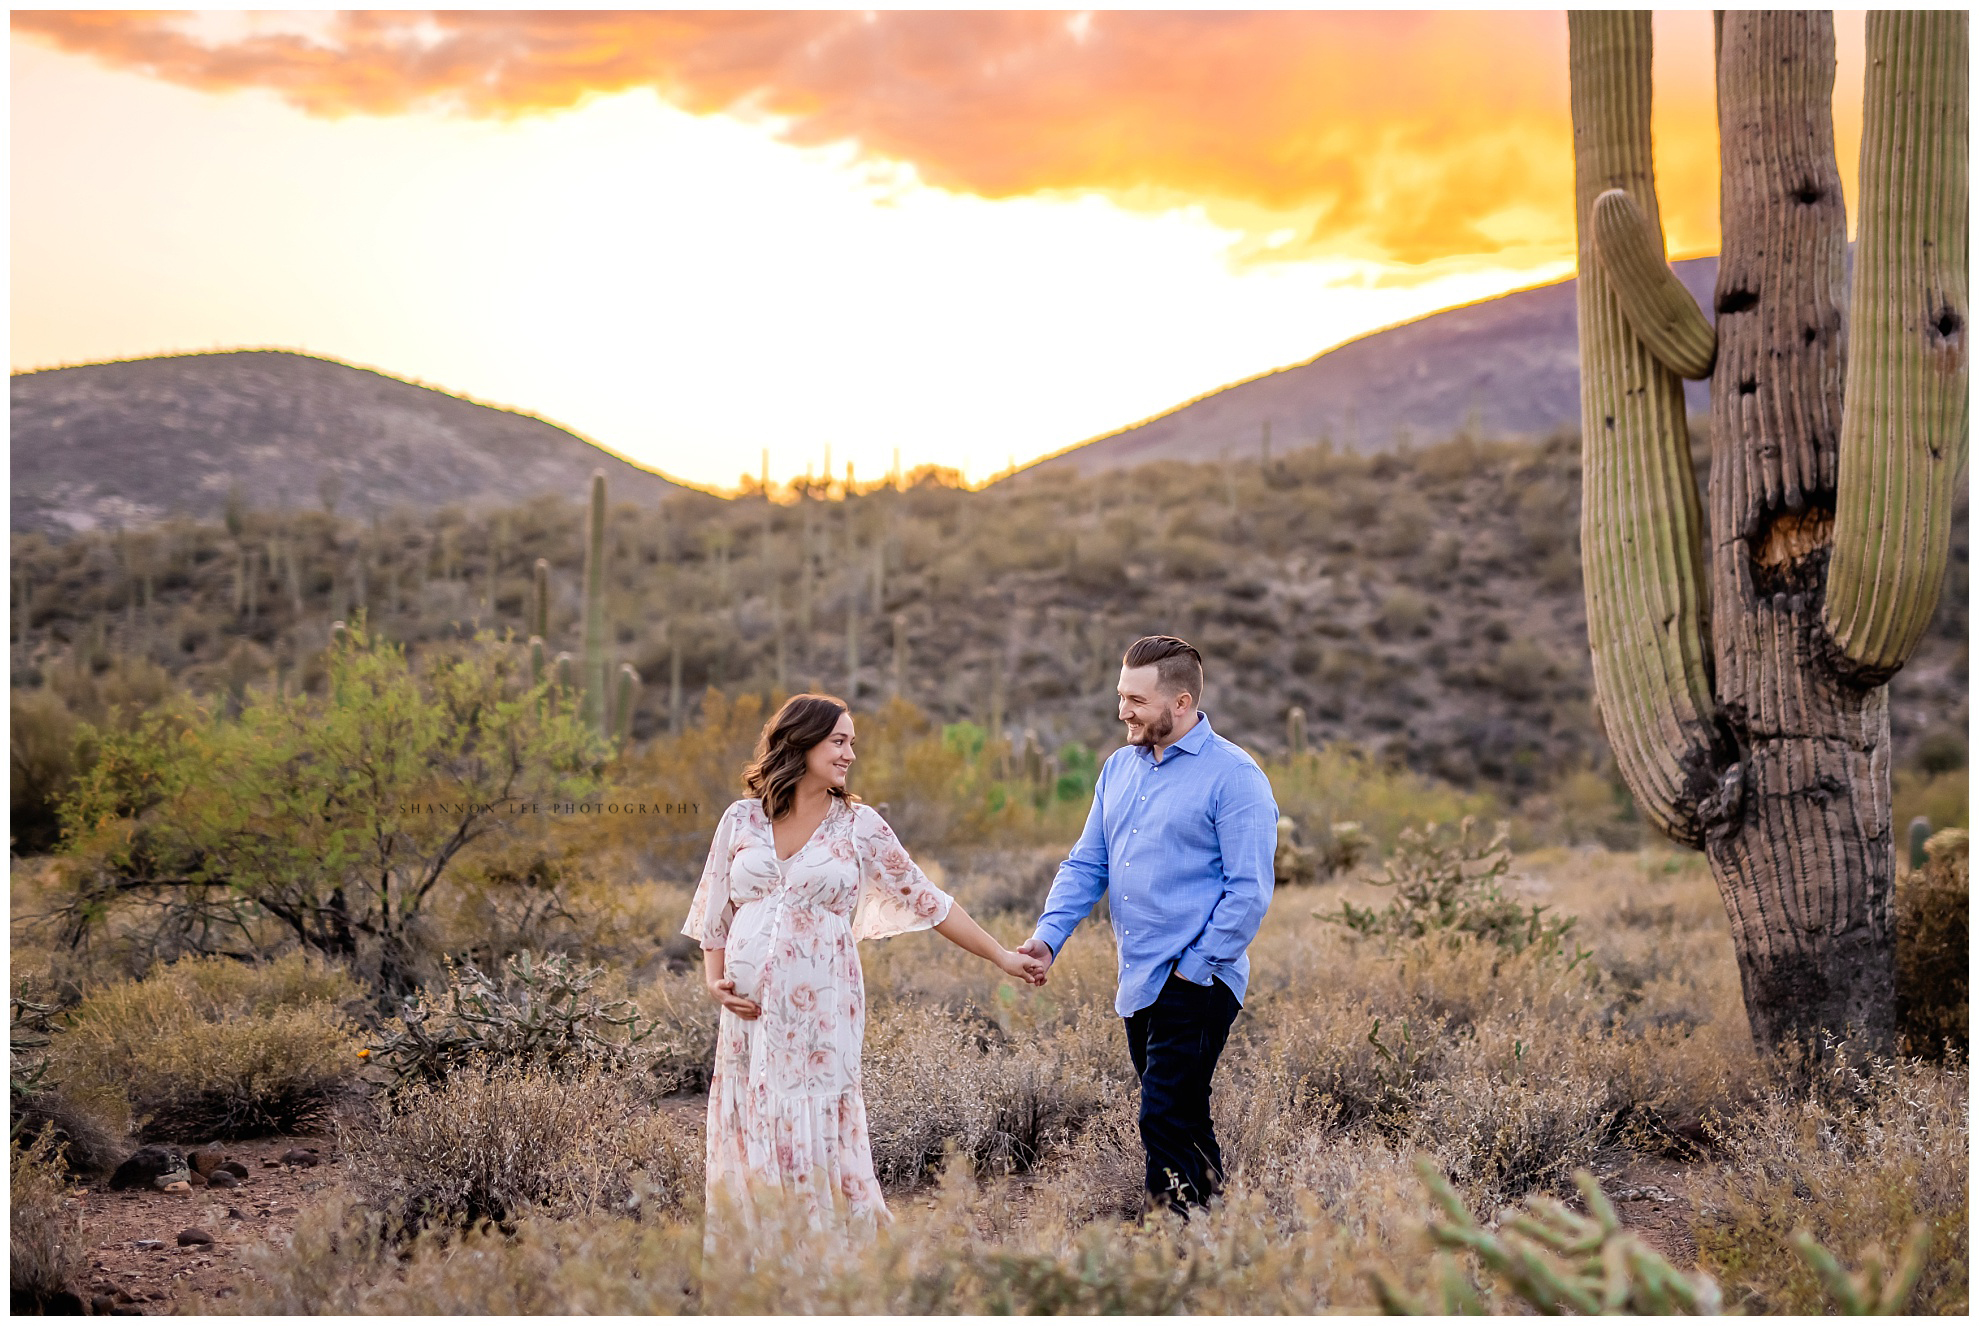 Jessica in floral maternity gown fire sunset in cave creek